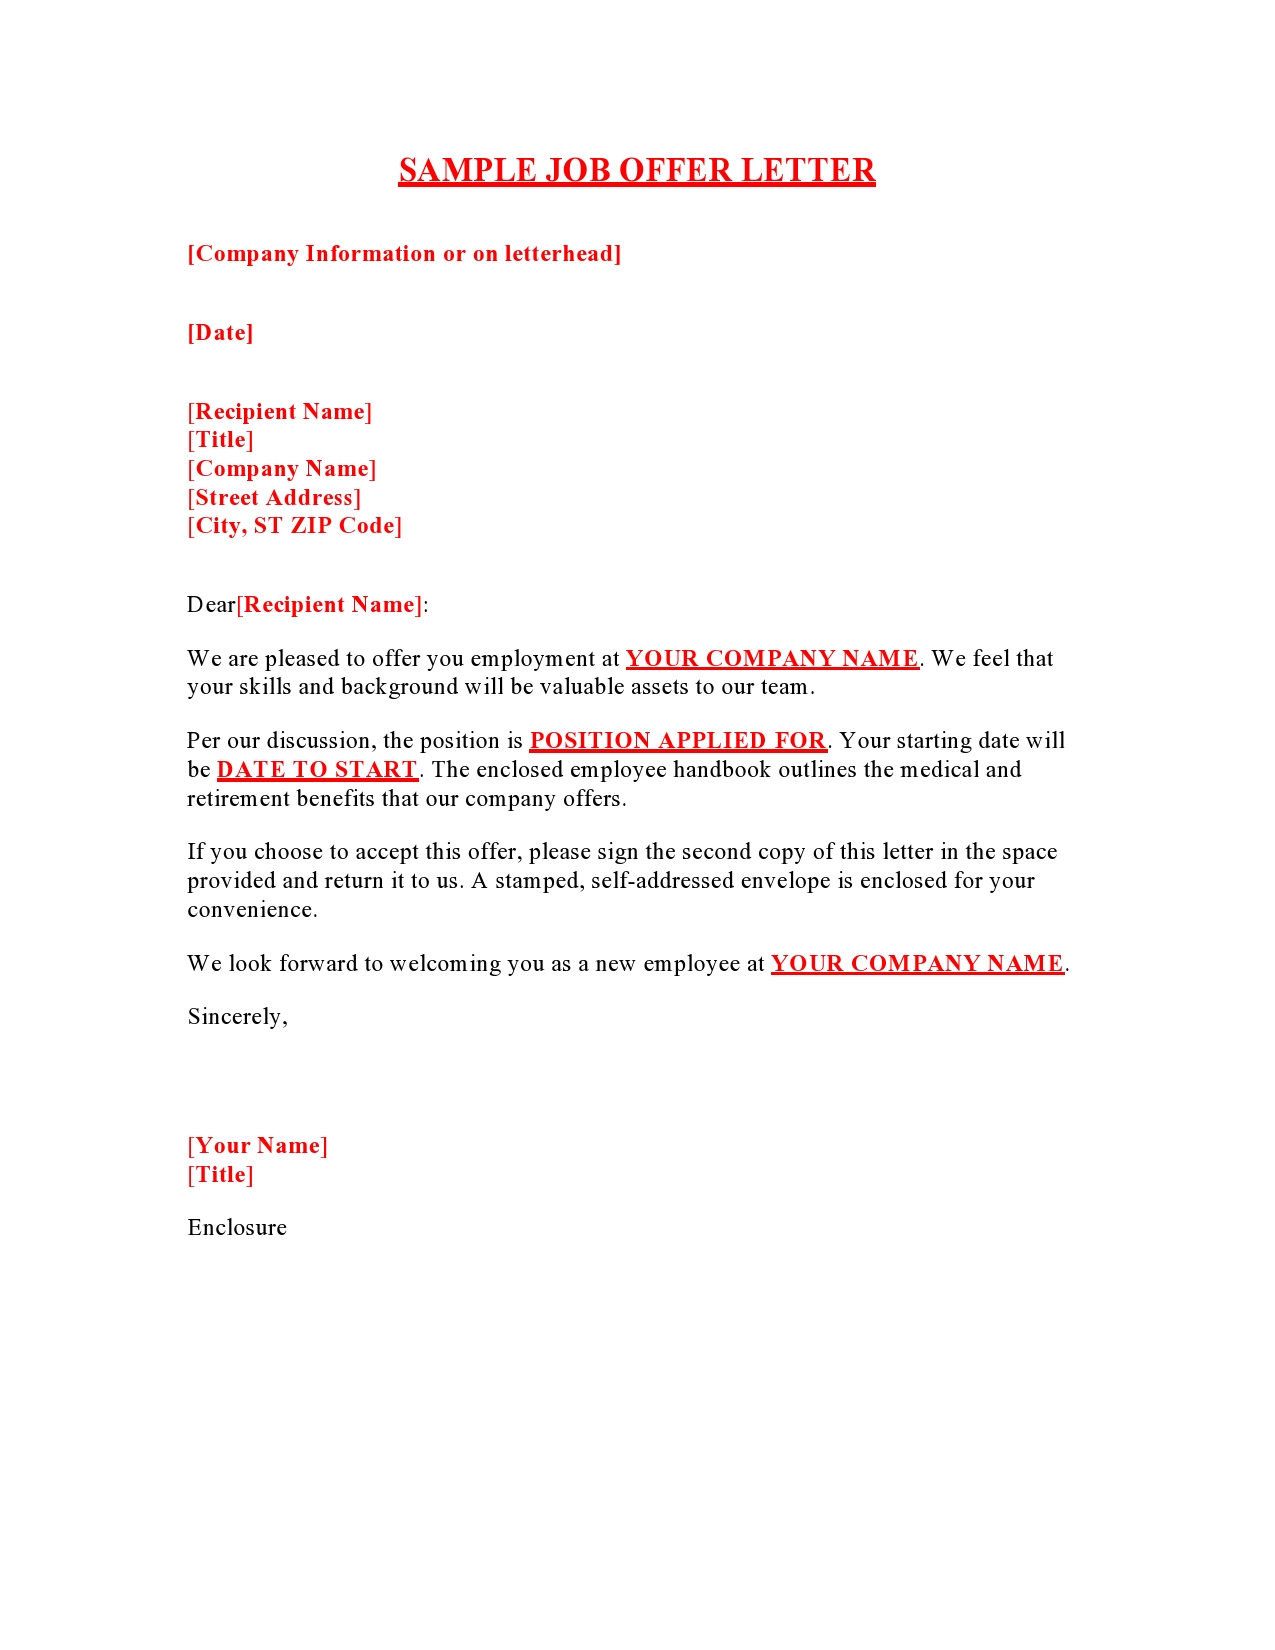 Free employment offer letter template 41